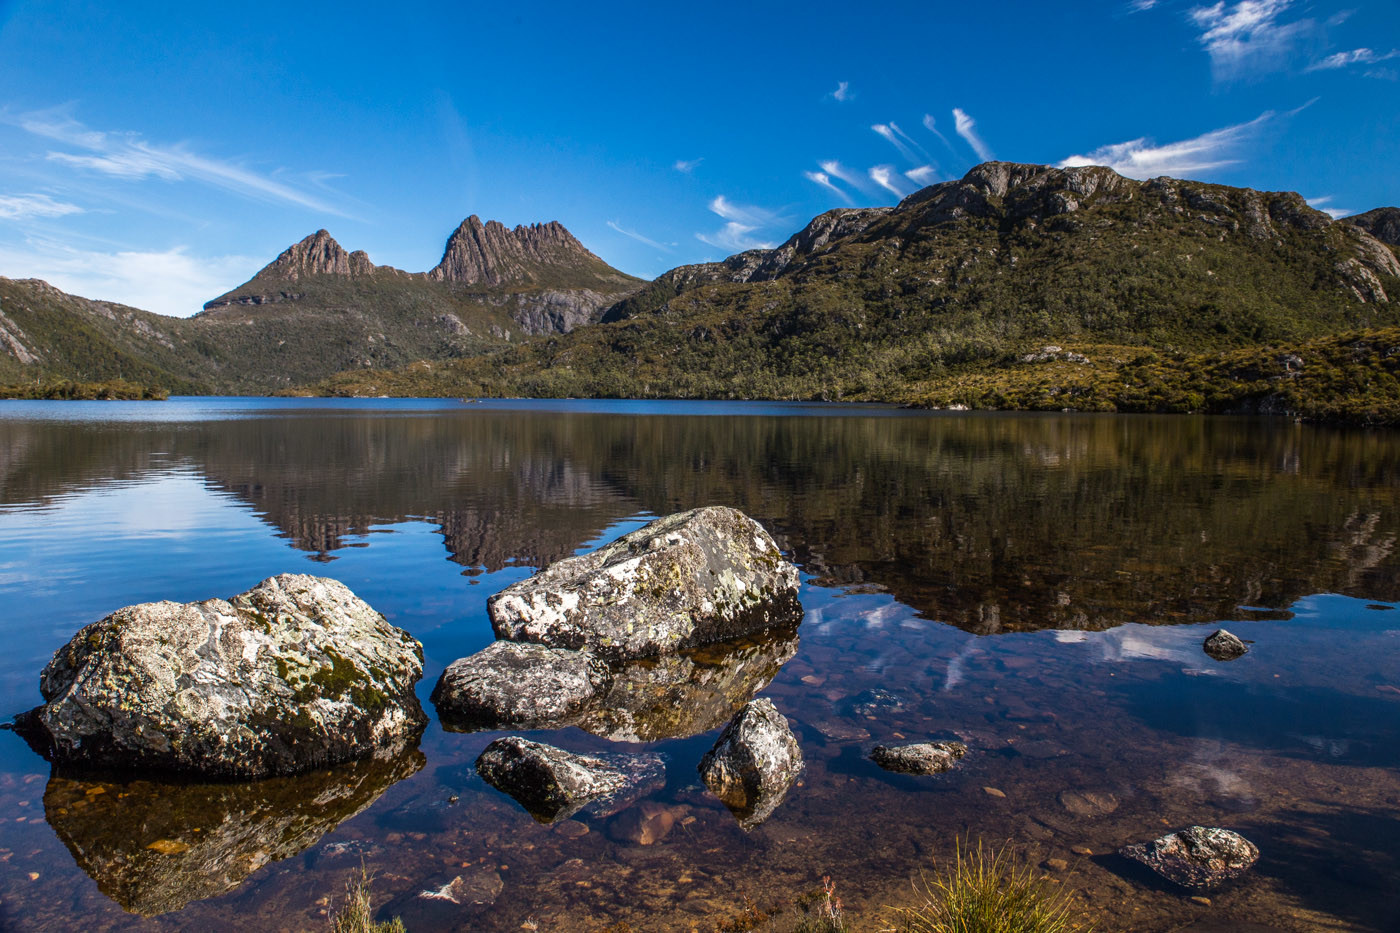 28 Photos That Will Make You Want to Travel to Tasmania. Cover Photo